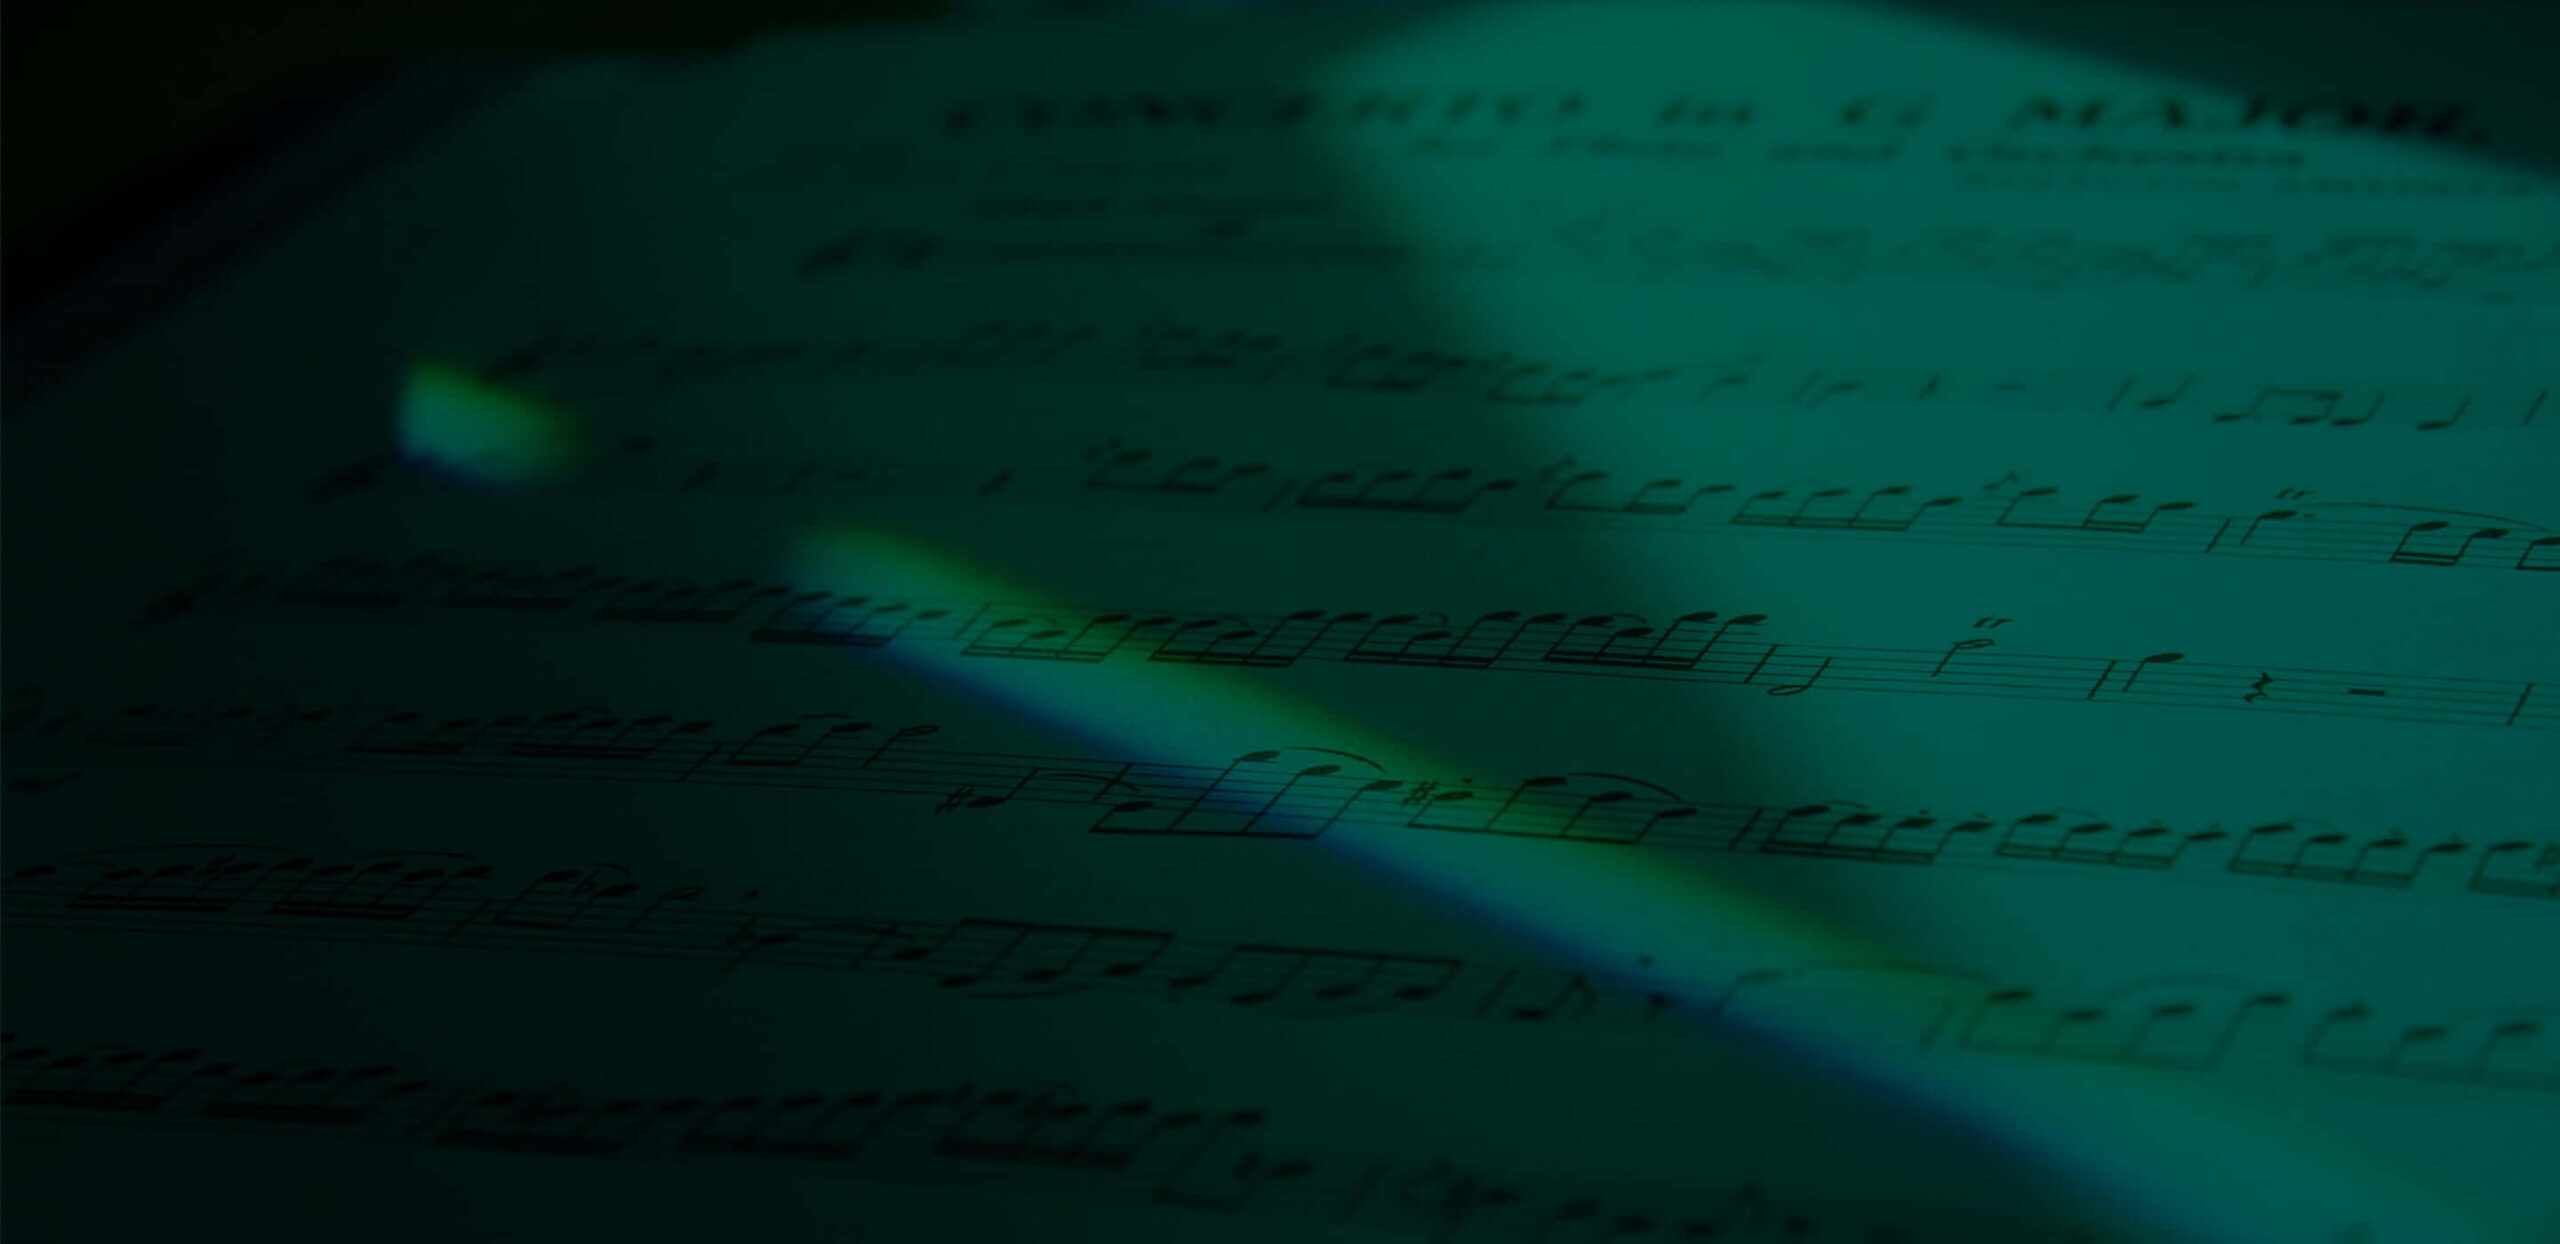 Closeup of sheet music with a green overlay